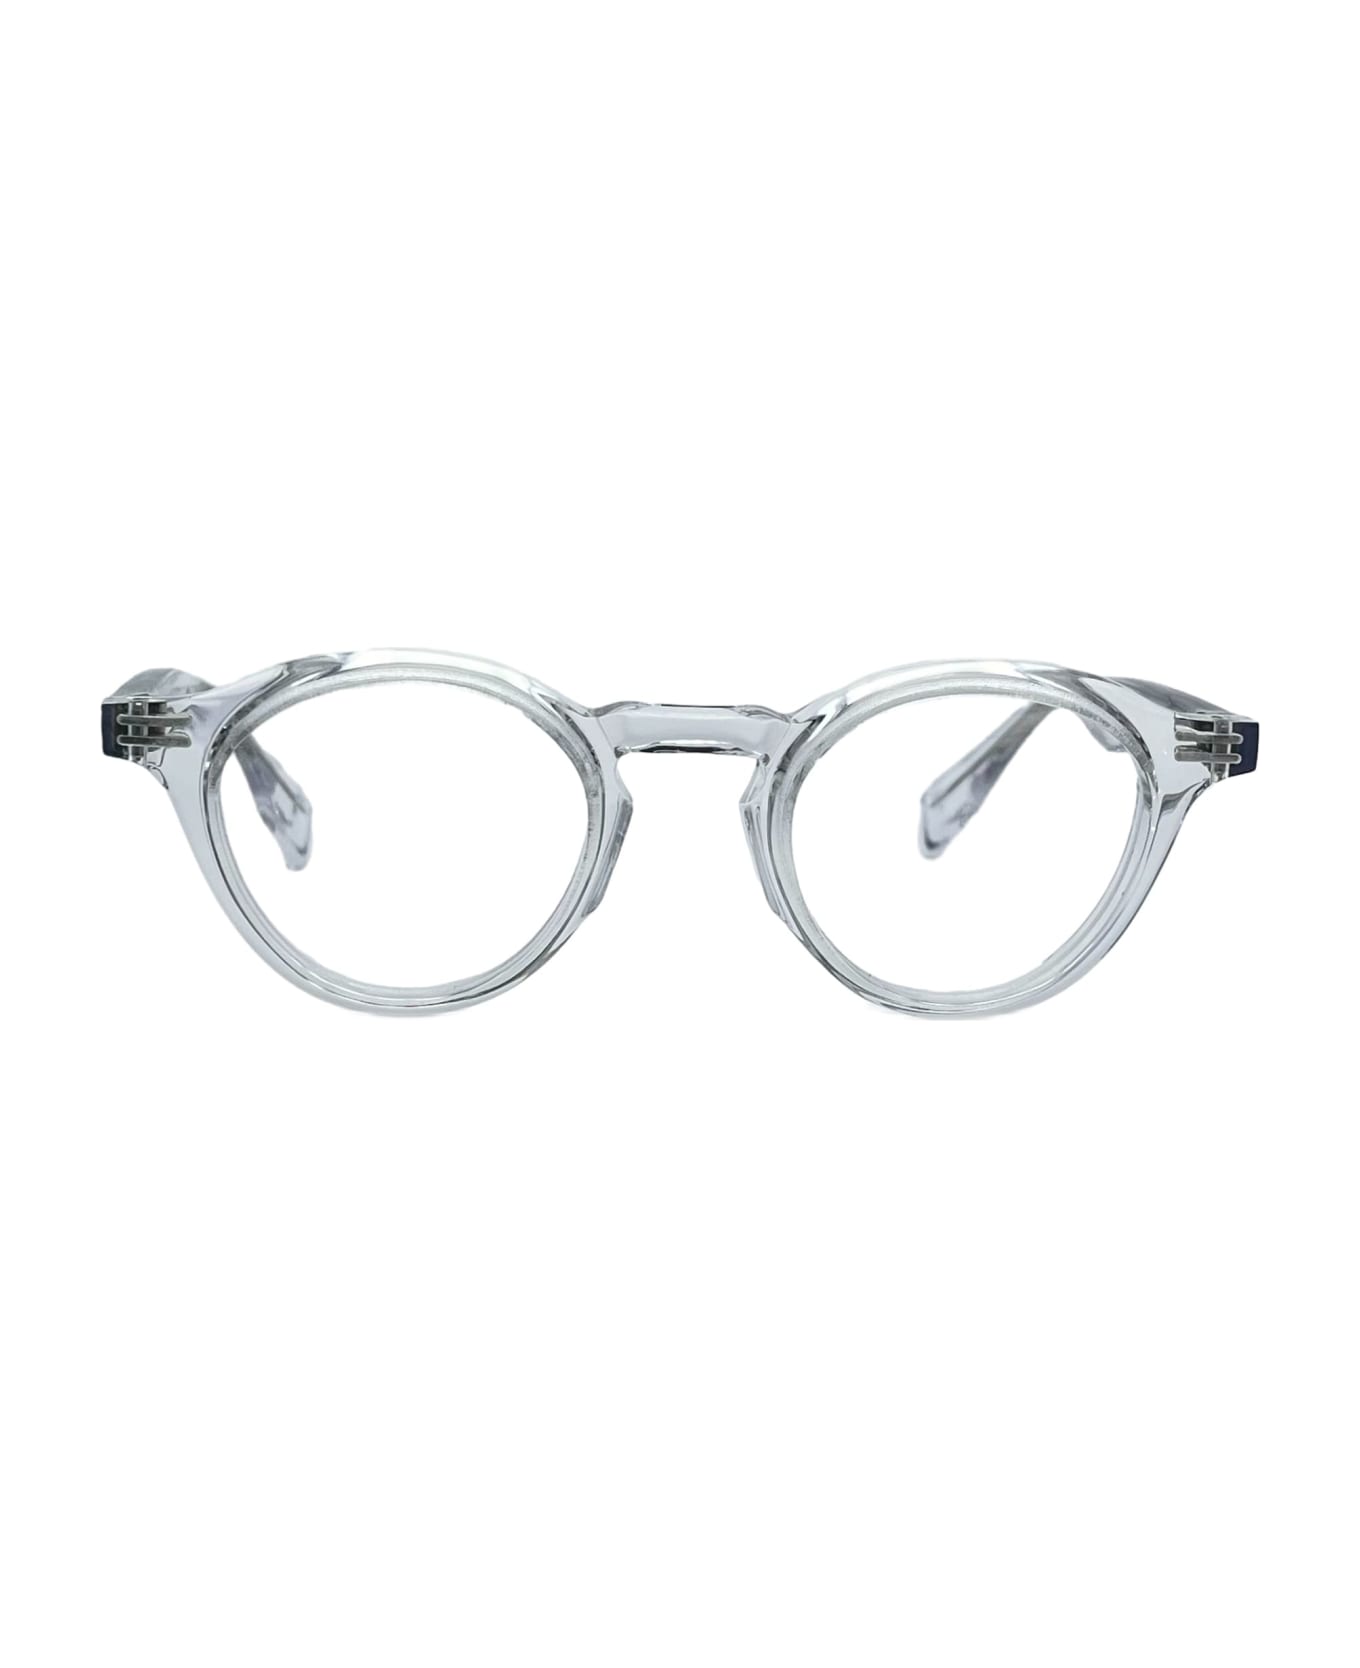 FACTORY900 Rf-019 - 827 Glasses - crystal clear